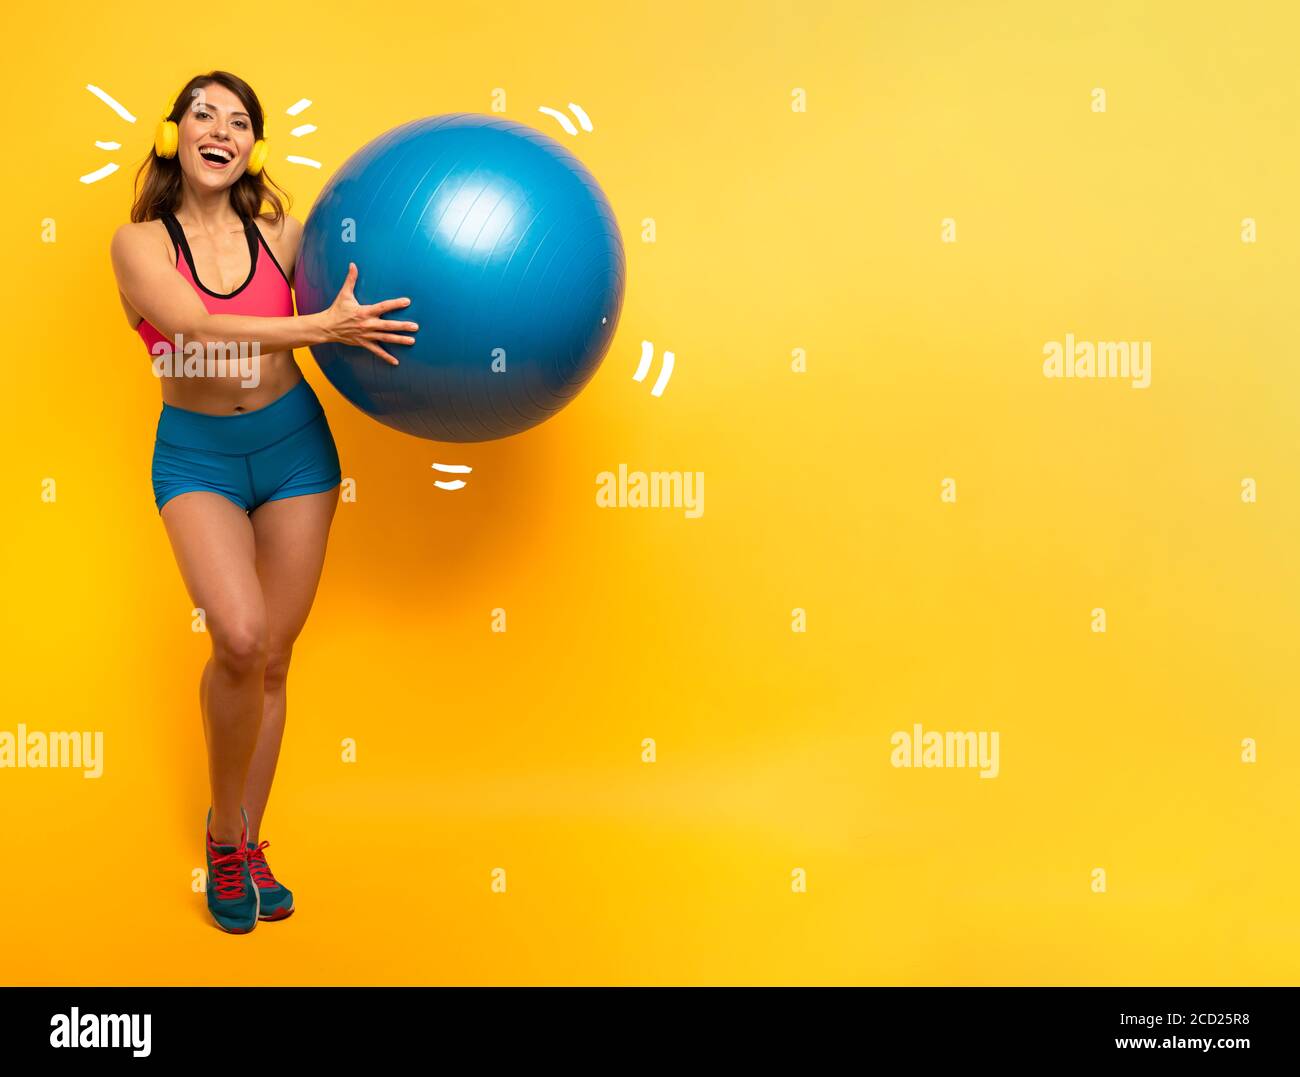 Girl with gym ball and headset is ready to start fitness activity Stock Photo